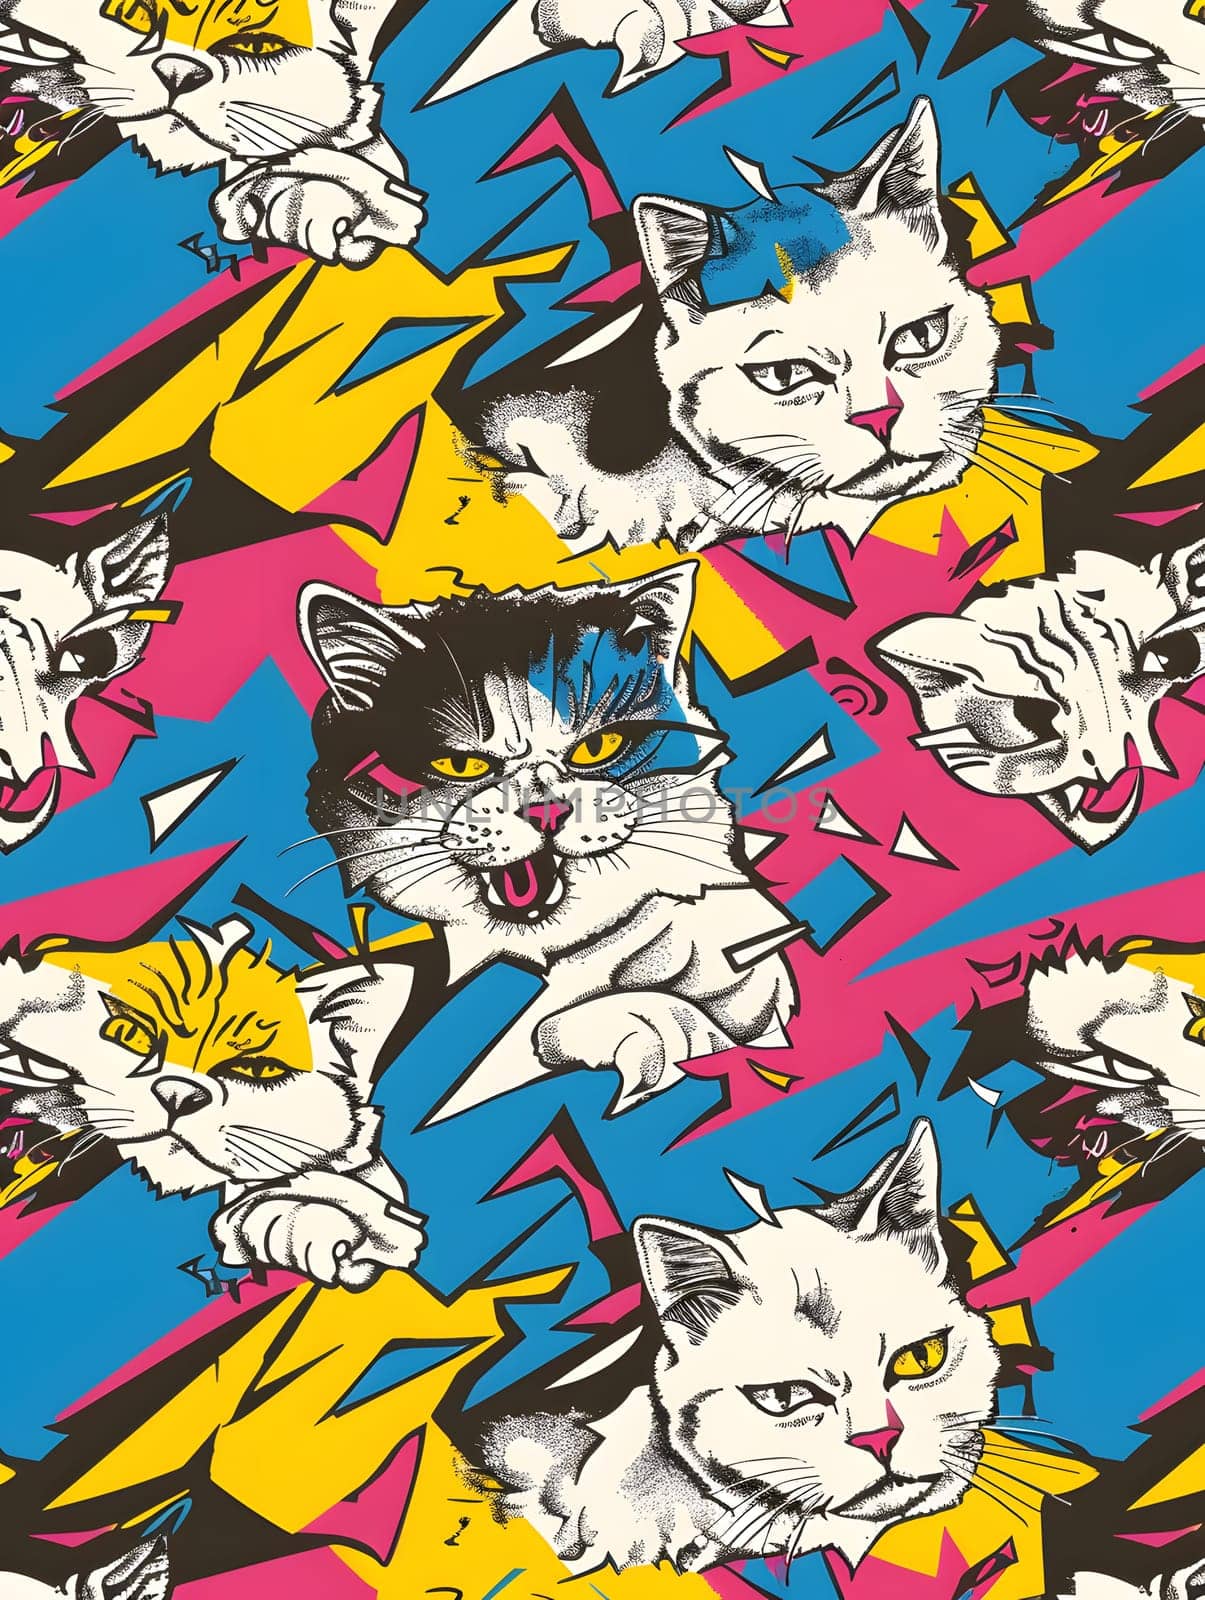 An artistic pattern featuring small to mediumsized cats from the Felidae family, with whiskers and vibrant colors, creating a seamless design perfect for cat lovers